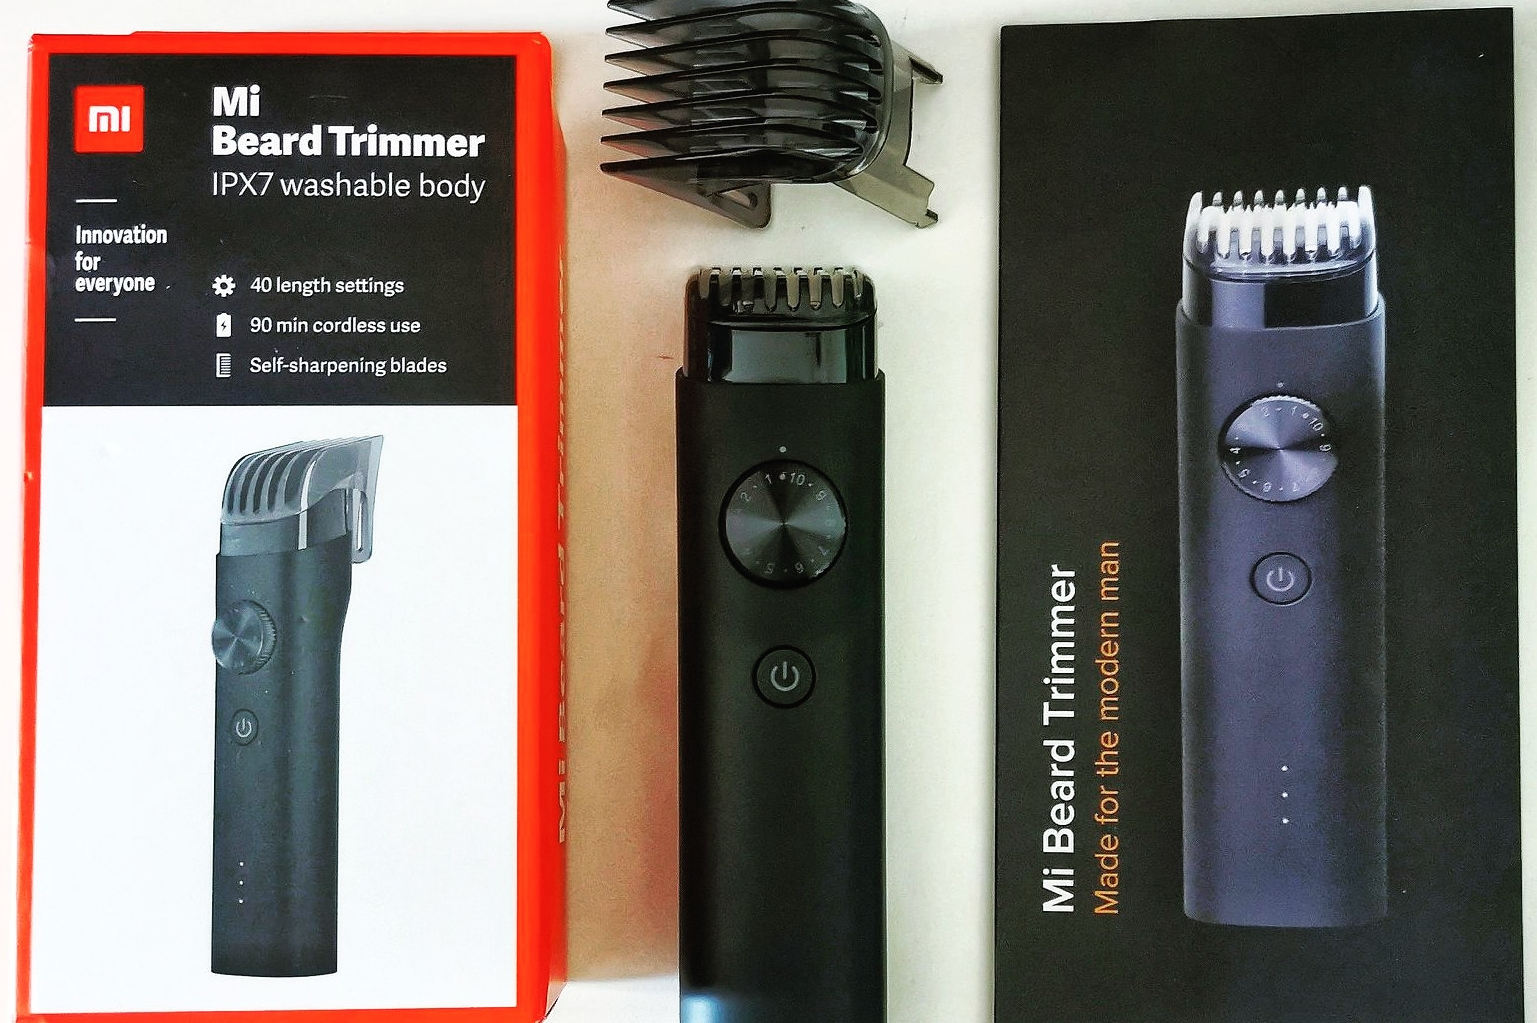 Xiaomi Mi Beard Trimmer Launched In India - Made For The Modern Man